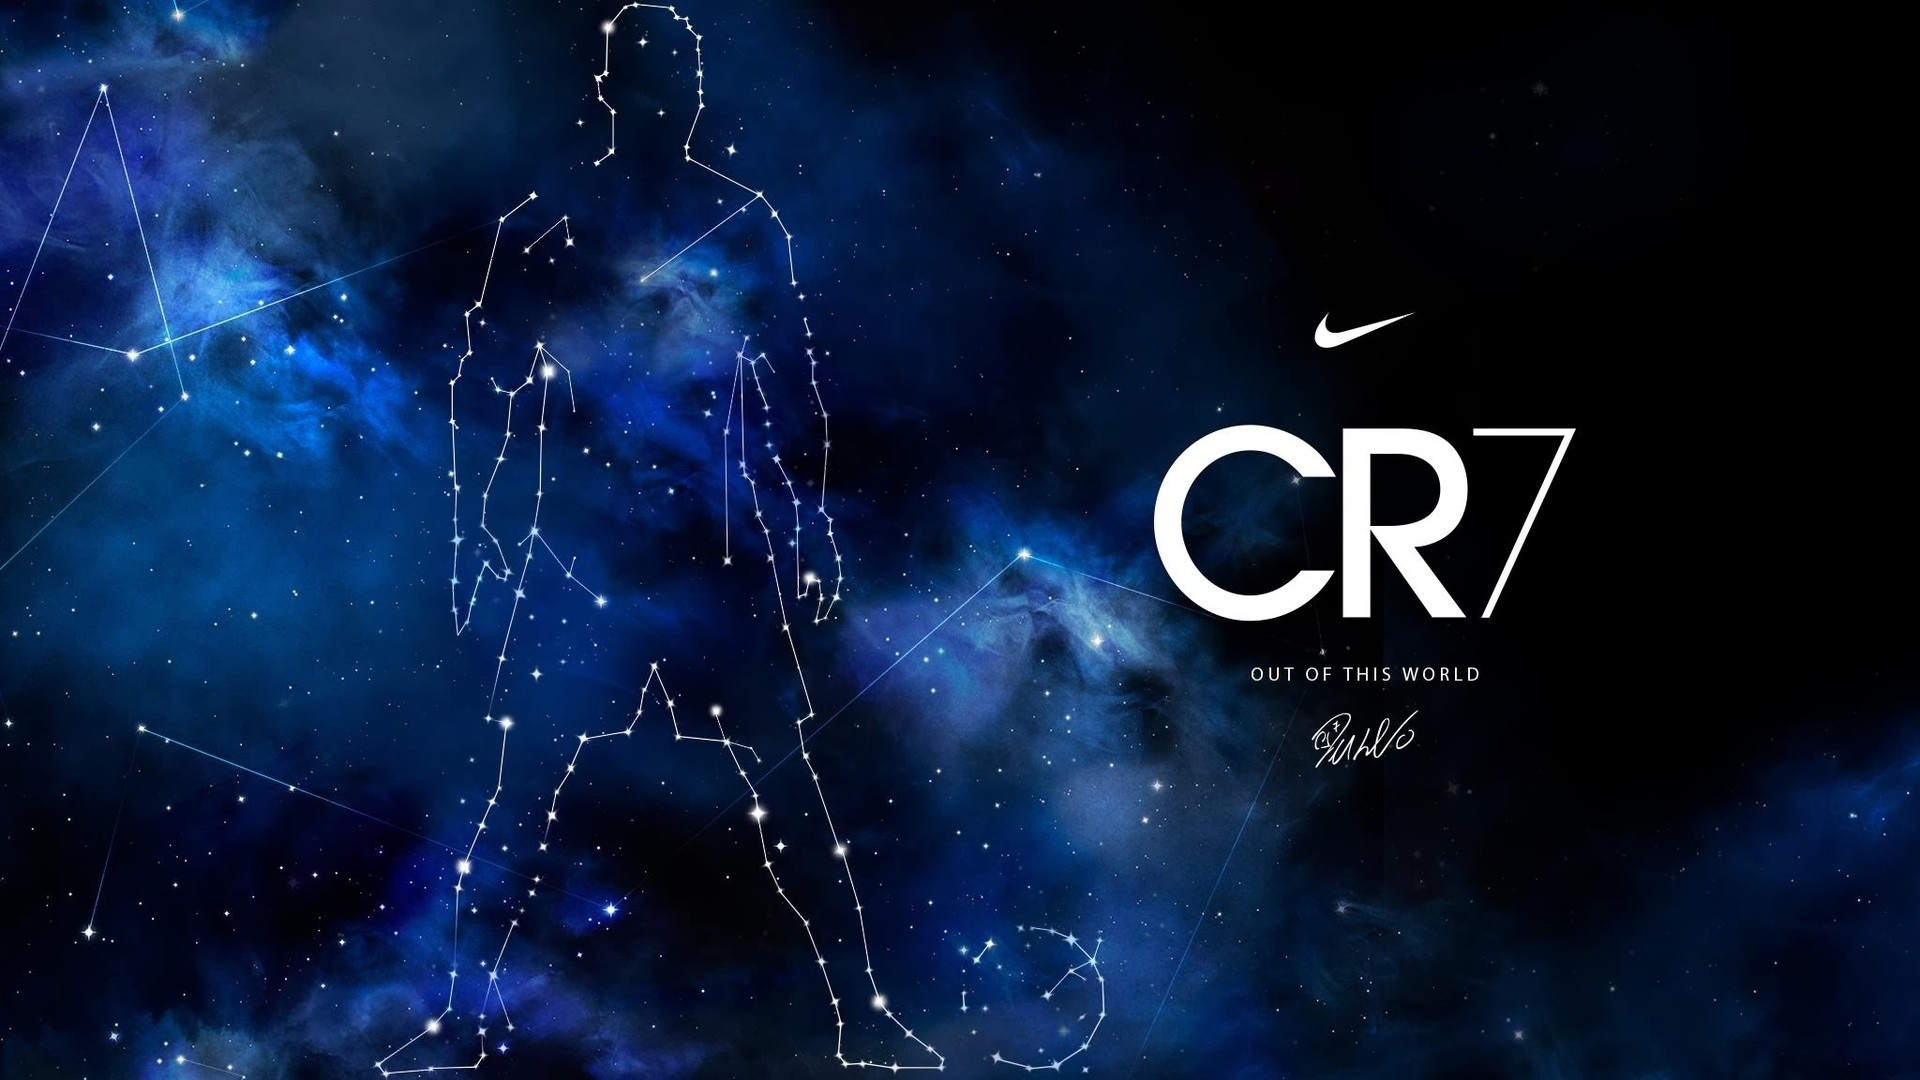 1920x1080 ... Cristiano Ronaldo Gala CR7 Superfly Boots Launched - YouTube Nike ...